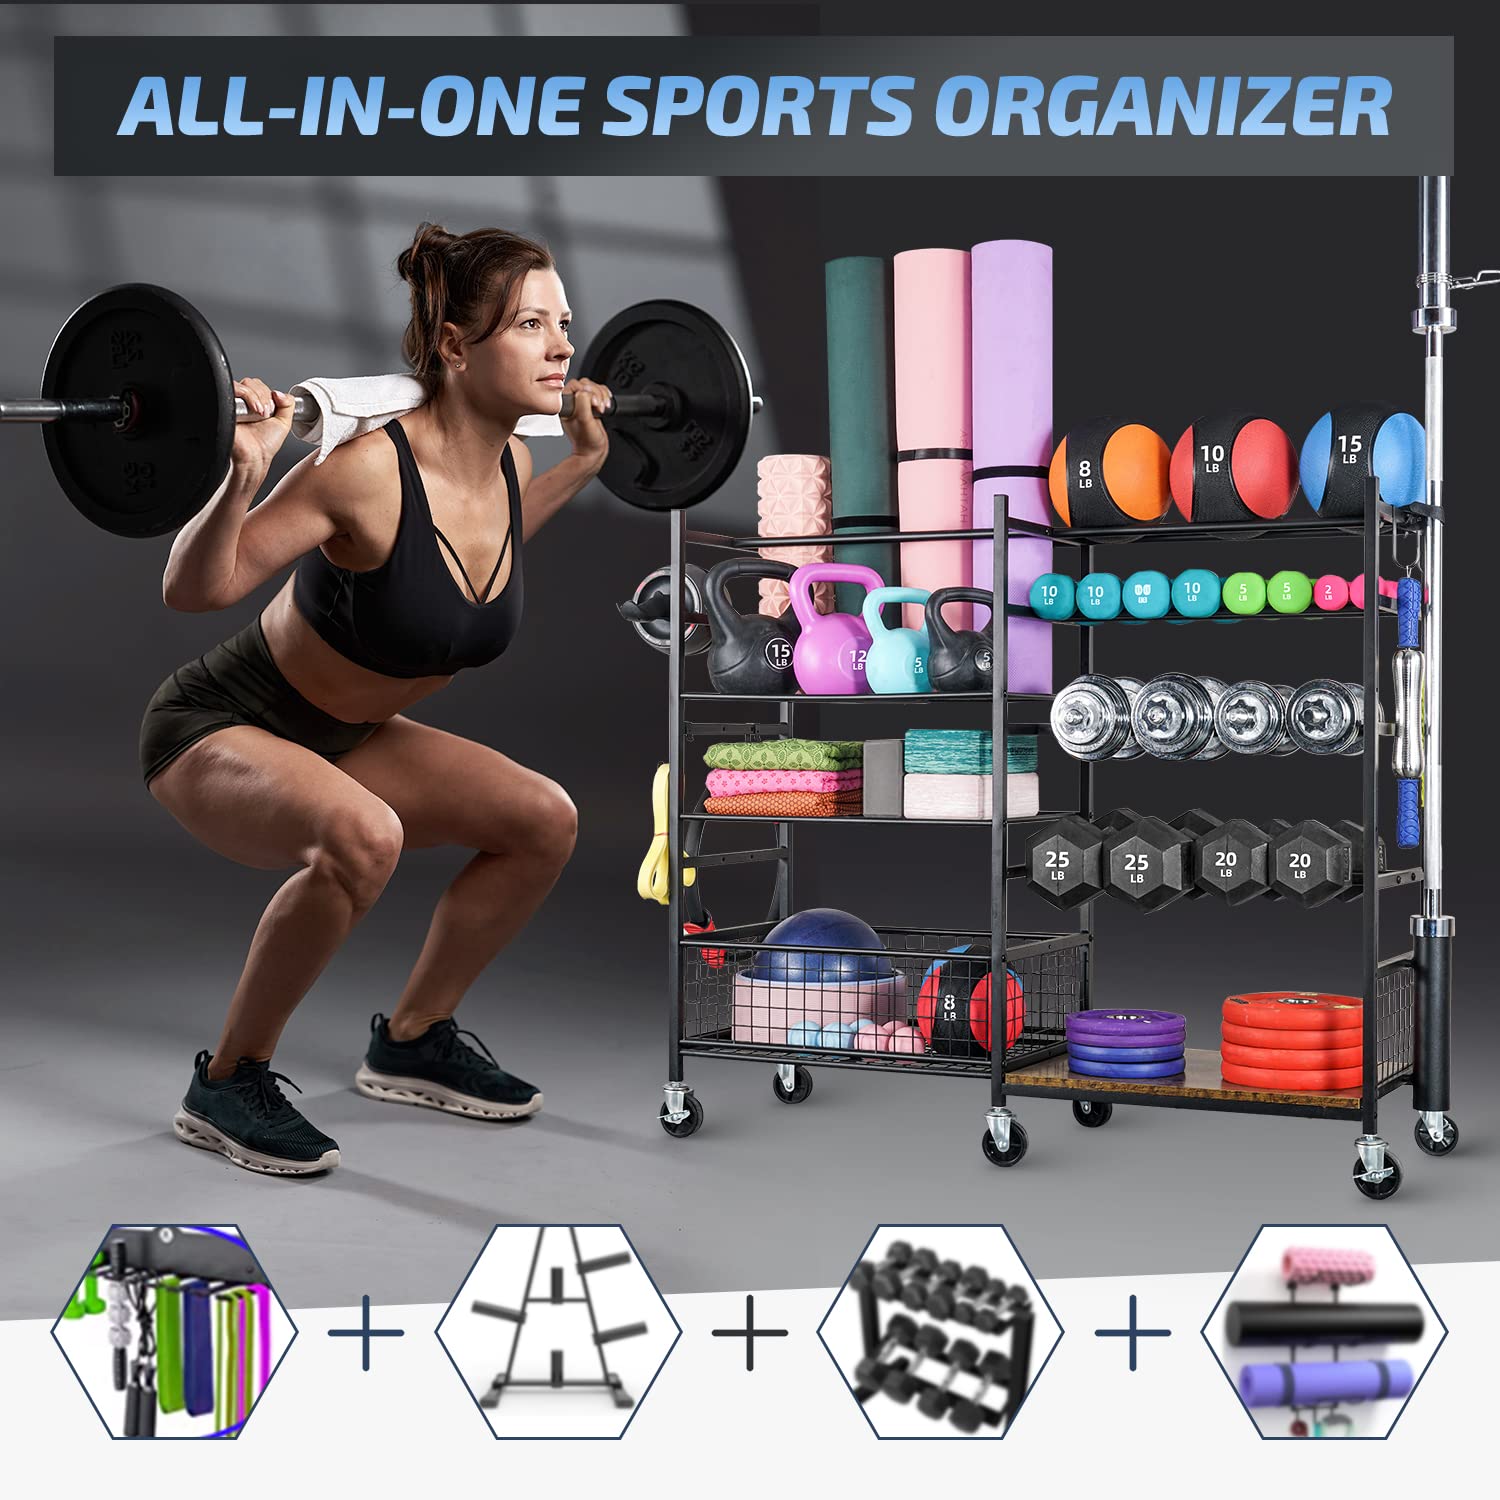 PLKOW Dumbbell Rack, Weight Rack for Dumbbells, Home Gym Storage for Dumbbells Kettlebells Yoga Mat and Balls, All in One Workout Storage with Wheels and Hooks, Powder Coated Finish Steel